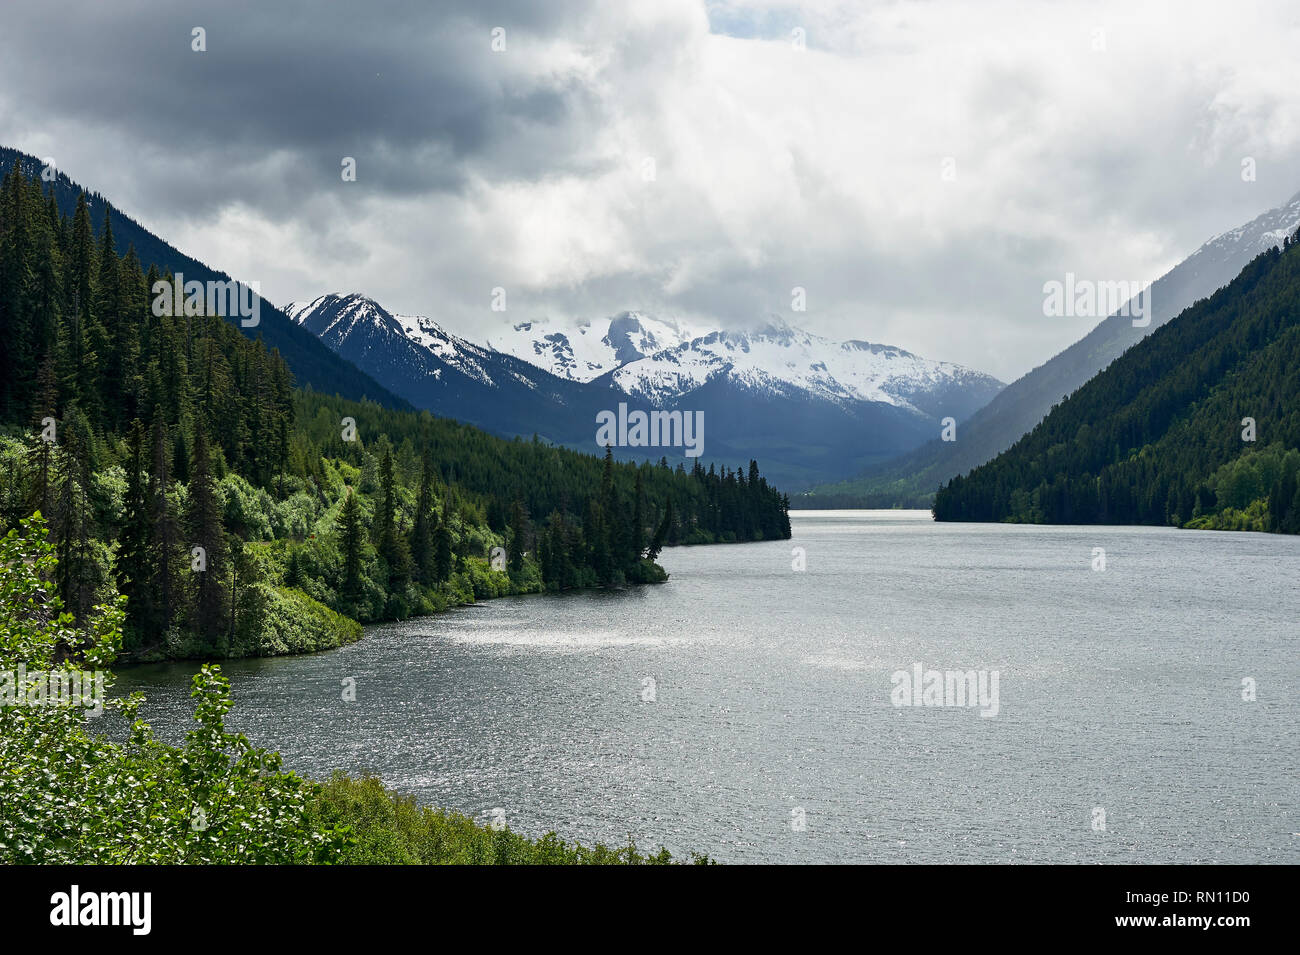 View at Duffey Lake, with overcast sky above snow covered mountains, surrounded by forest, along Highway 99, near Whistler, British Columbia, Canada Stock Photo